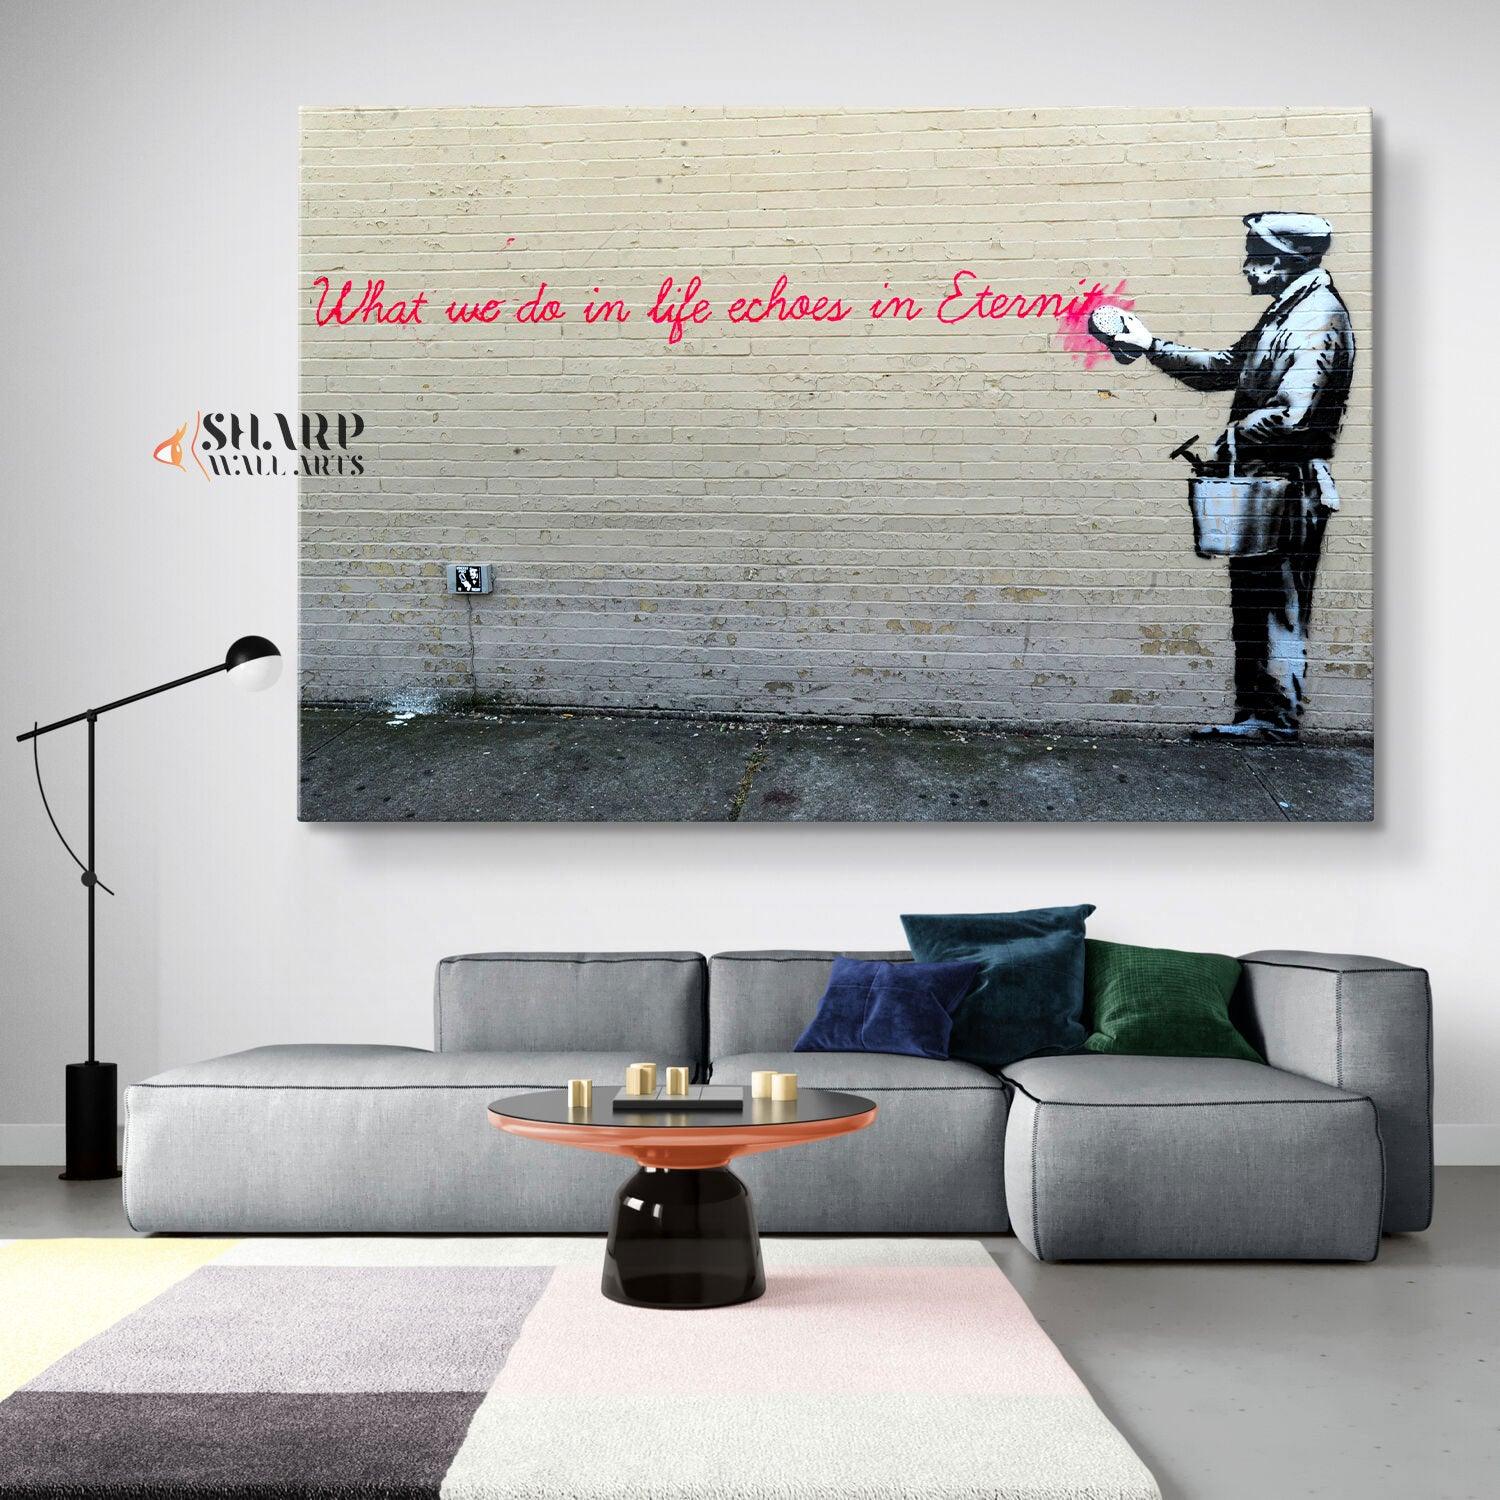 Banksy - What We Do In Life Echoes In Eternity Wall Art Canvas - SharpWallArts